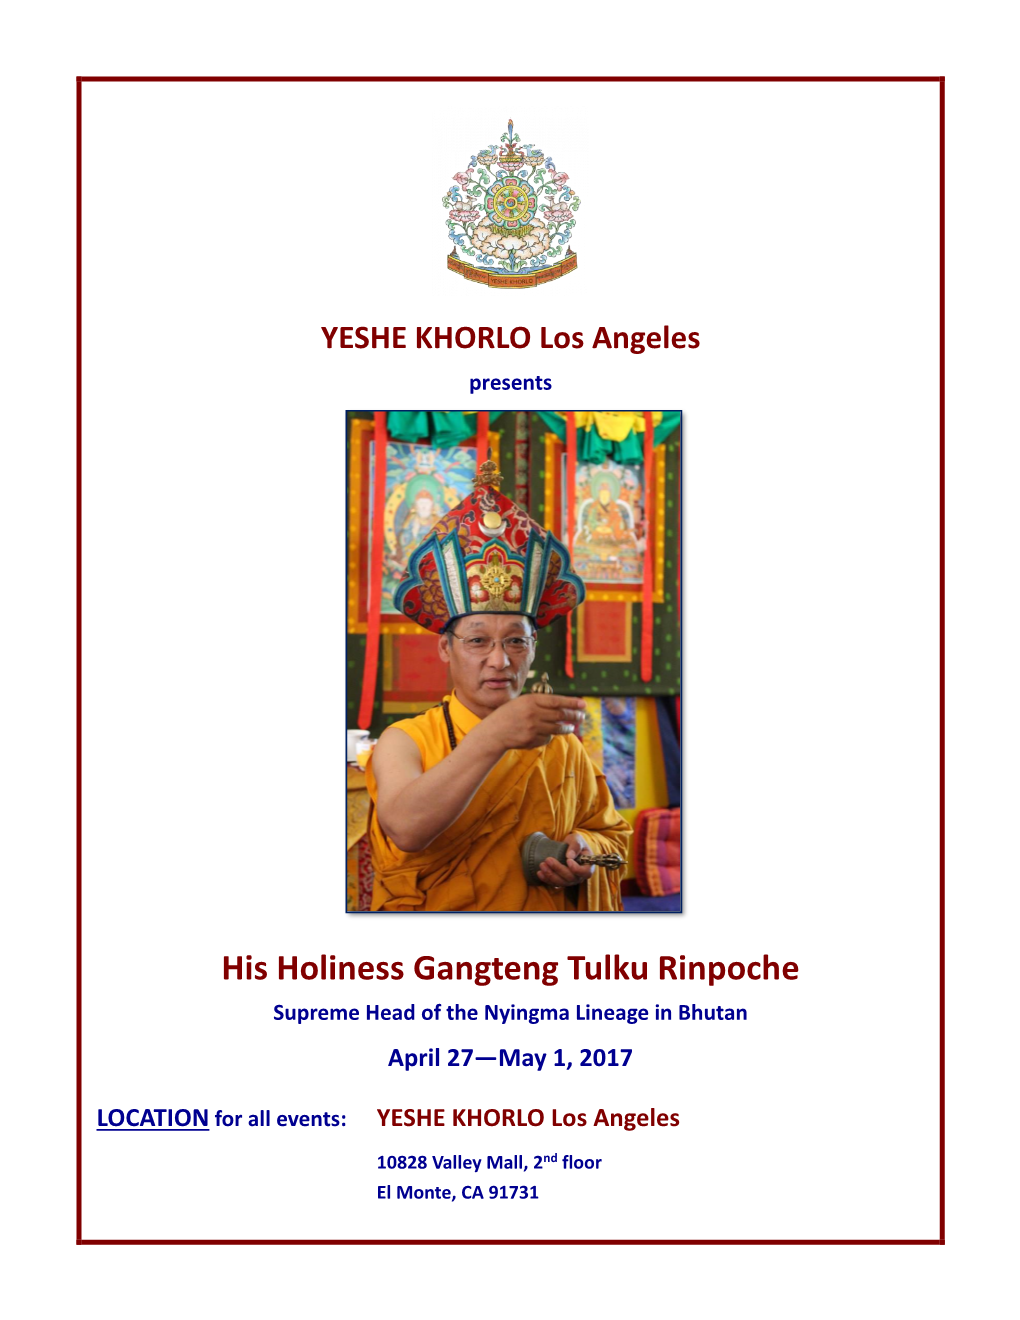 His Holiness Gangteng Tulku Rinpoche Supreme Head of the Nyingma Lineage in Bhutan April 27—May 1, 2017